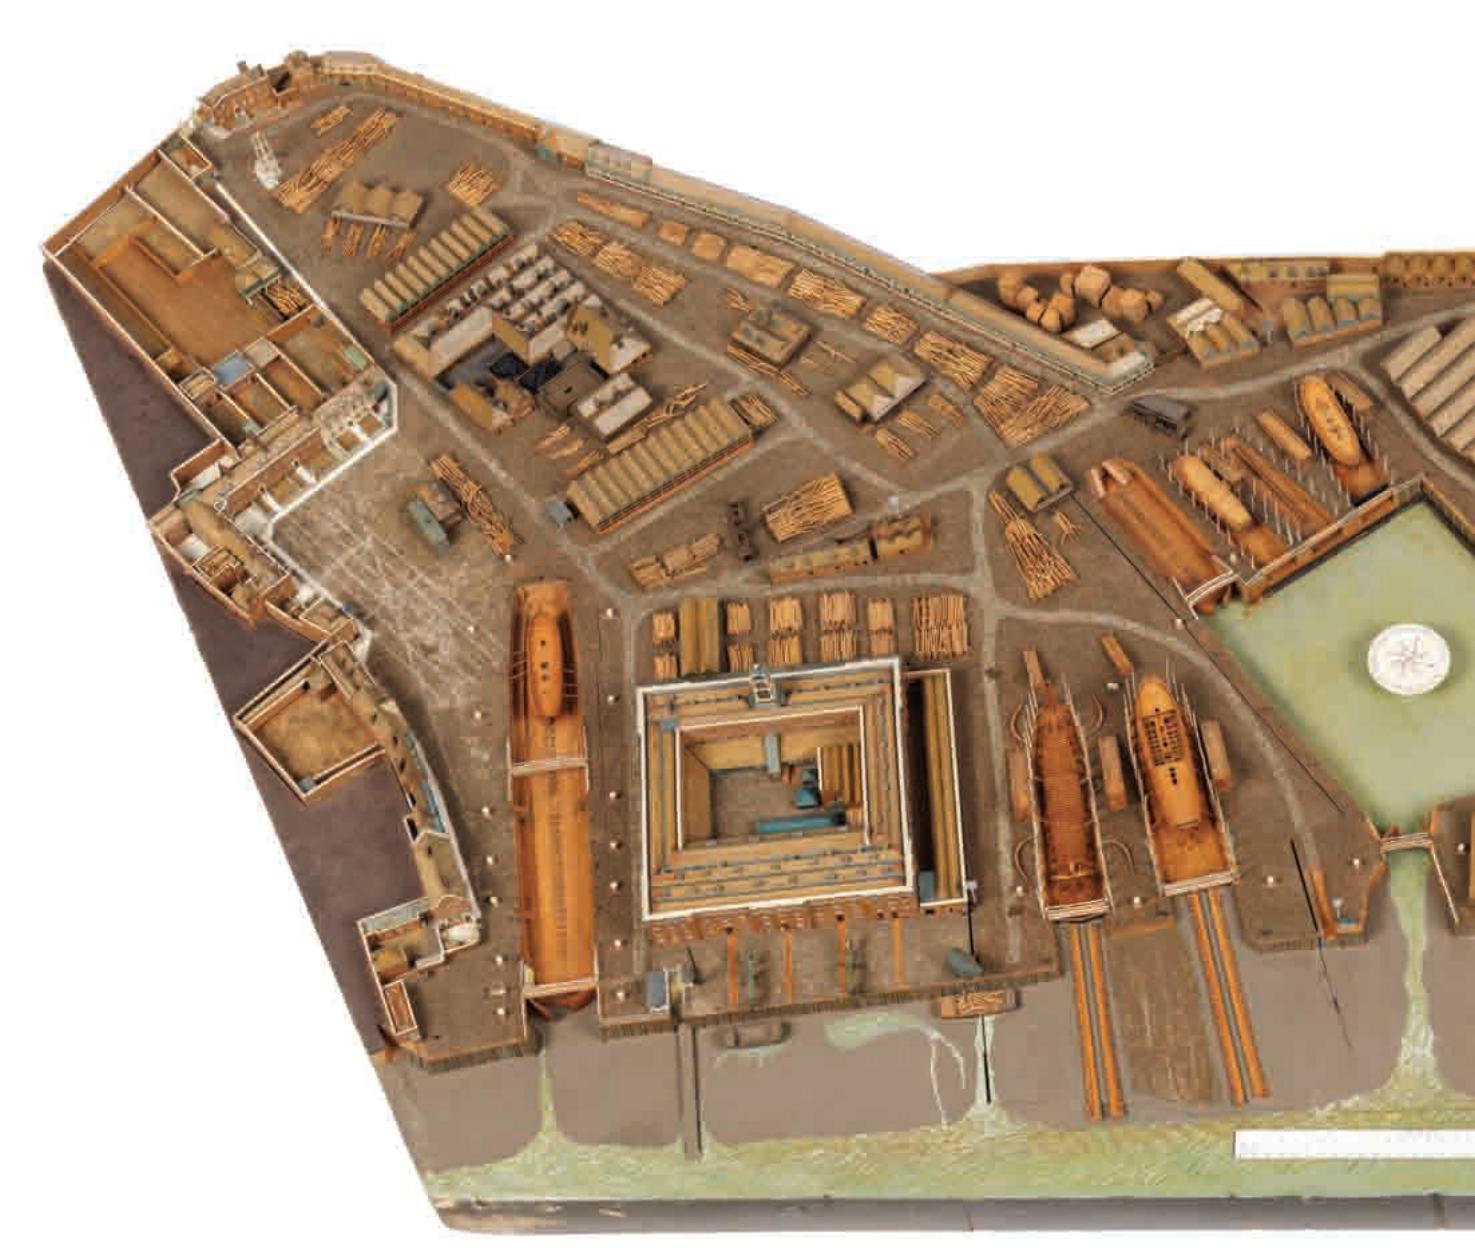 Picture of Depteford Dockyard Model
                                found on page 17 of book (Source:
                                Publisher)